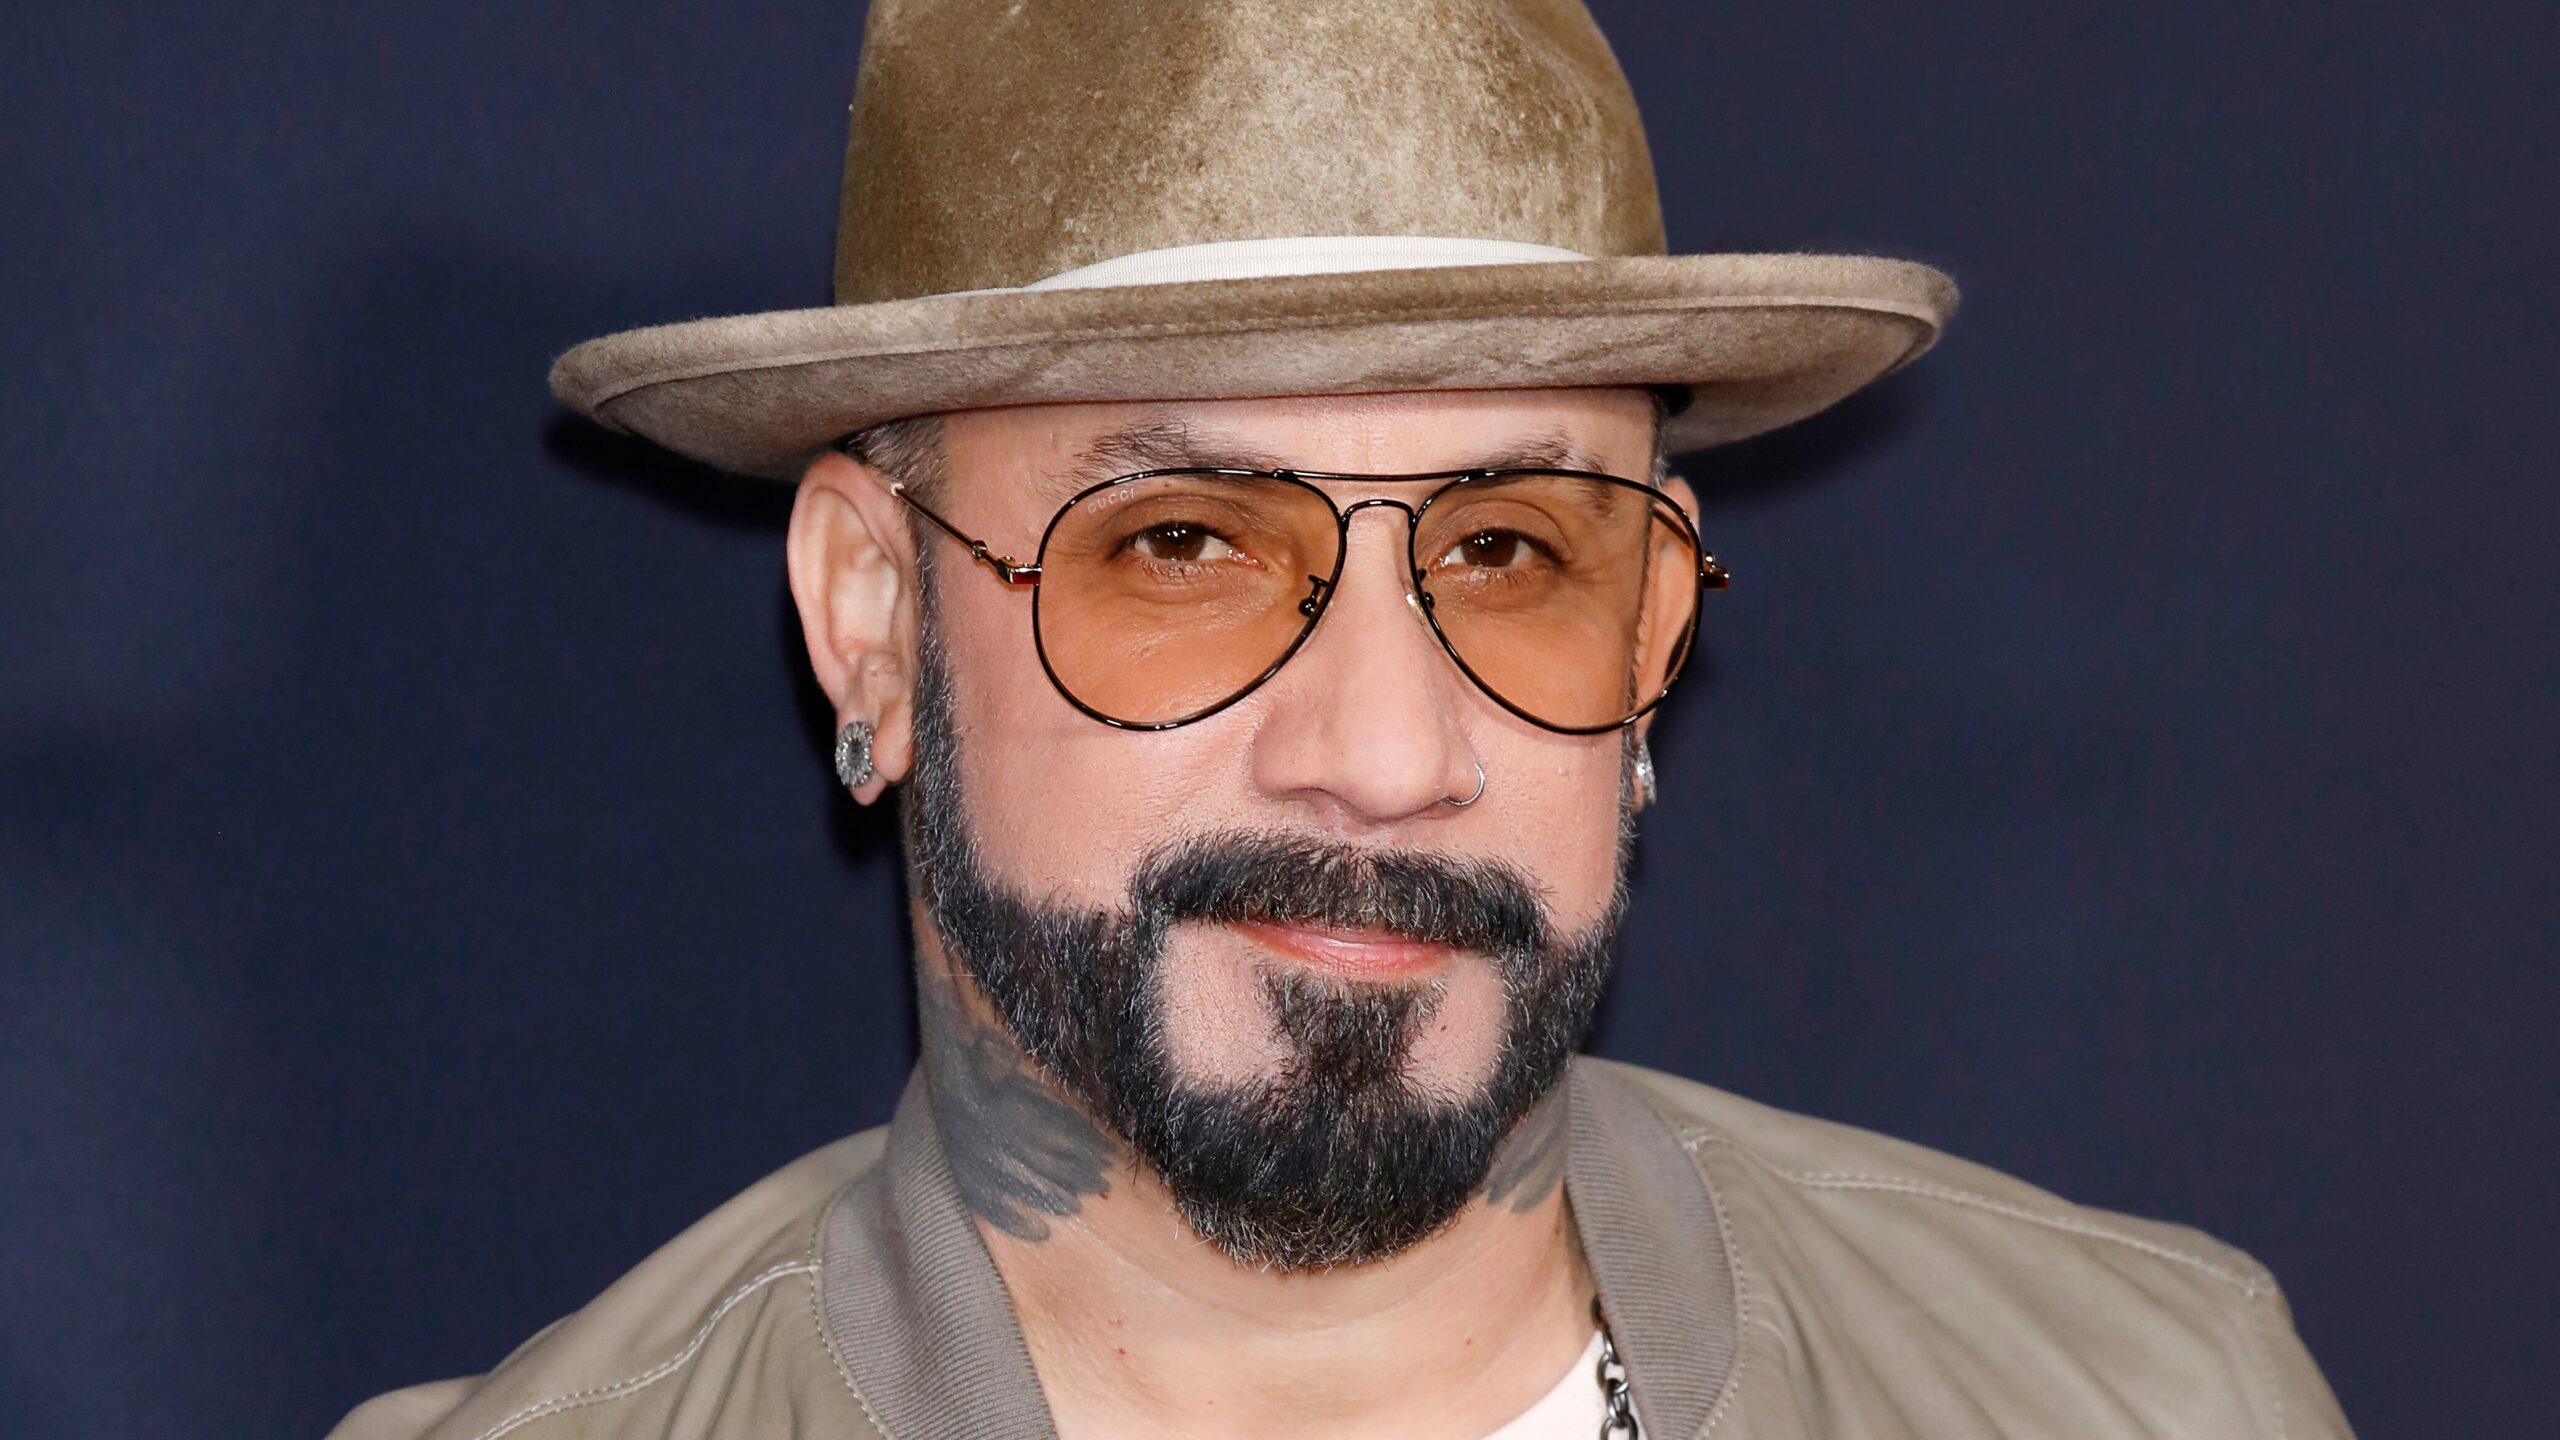 Backstreet Boys member AJ McLean joins Period 29 of ‘Dancing With the Stars’